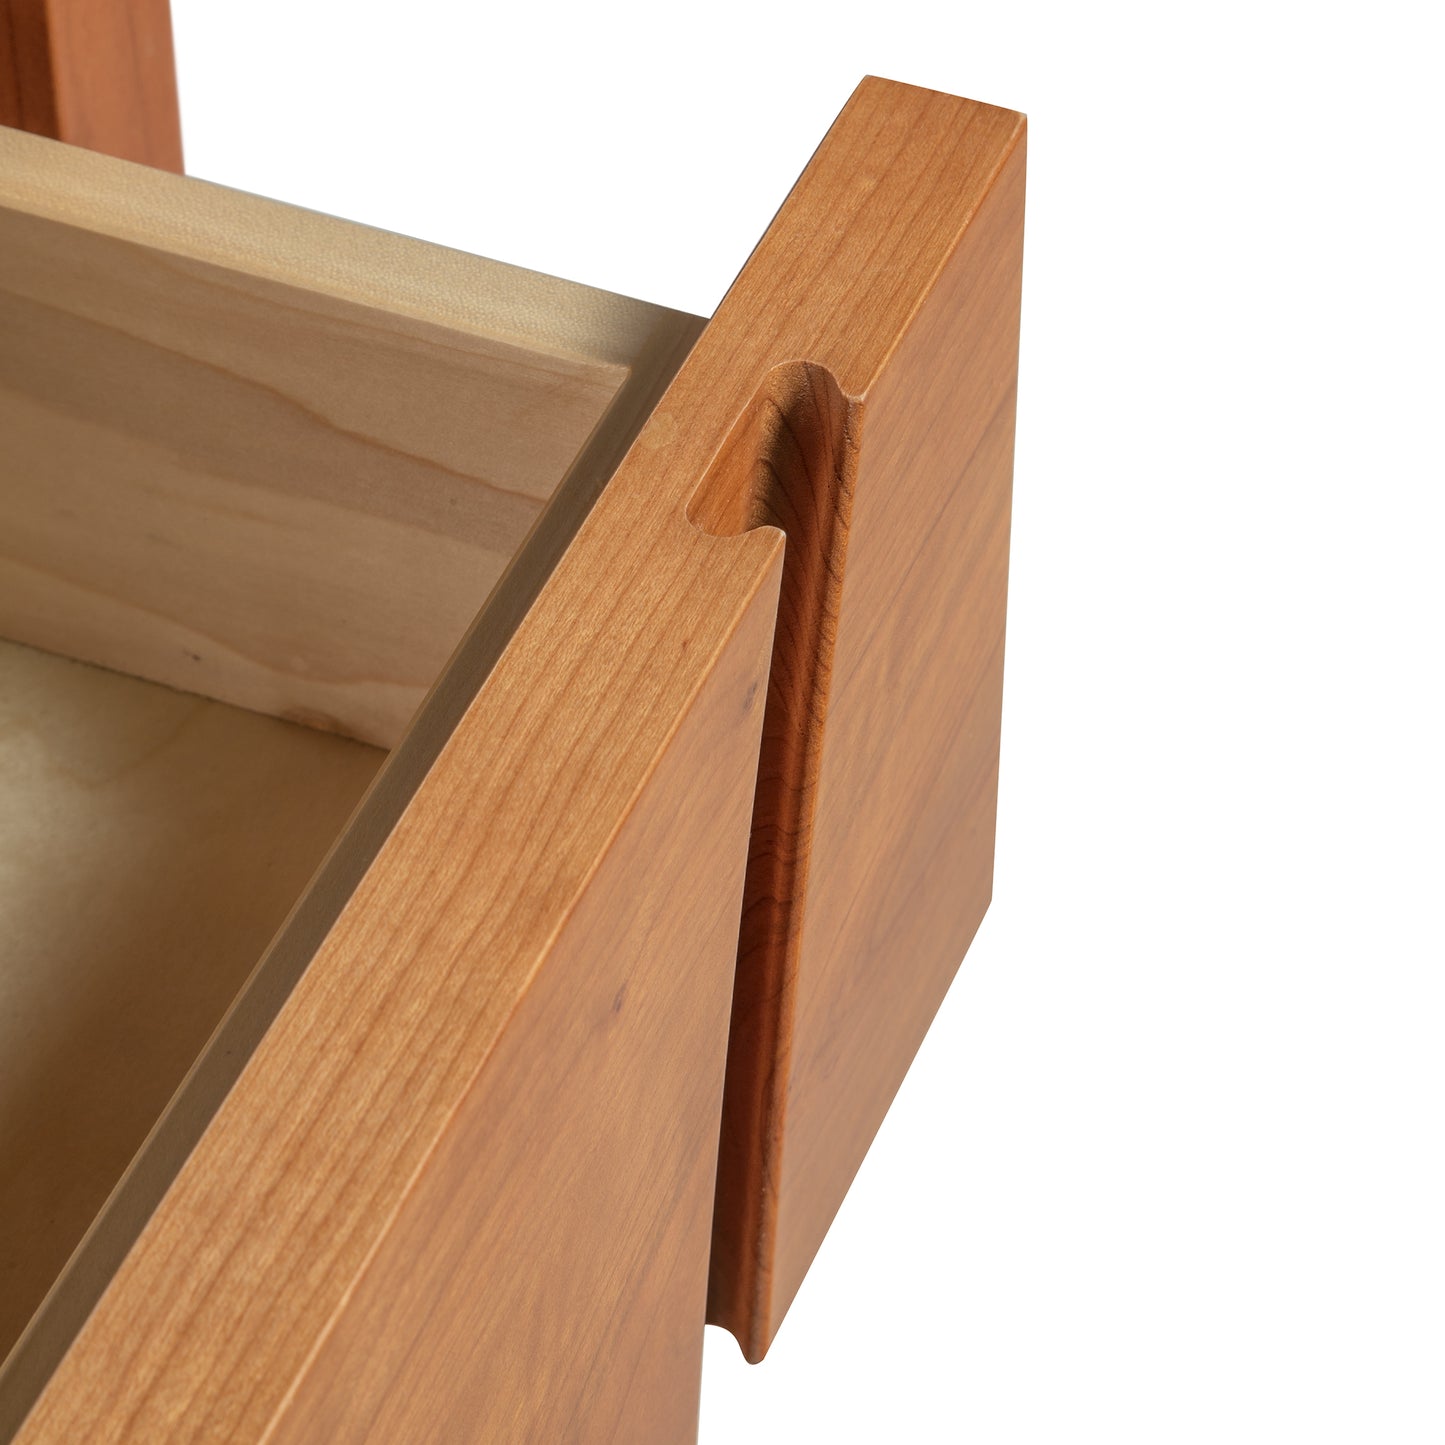 A close up view of a wooden storage drawer on a Lyndon Furniture Holland 1-Drawer Open Shelf Nightstand.